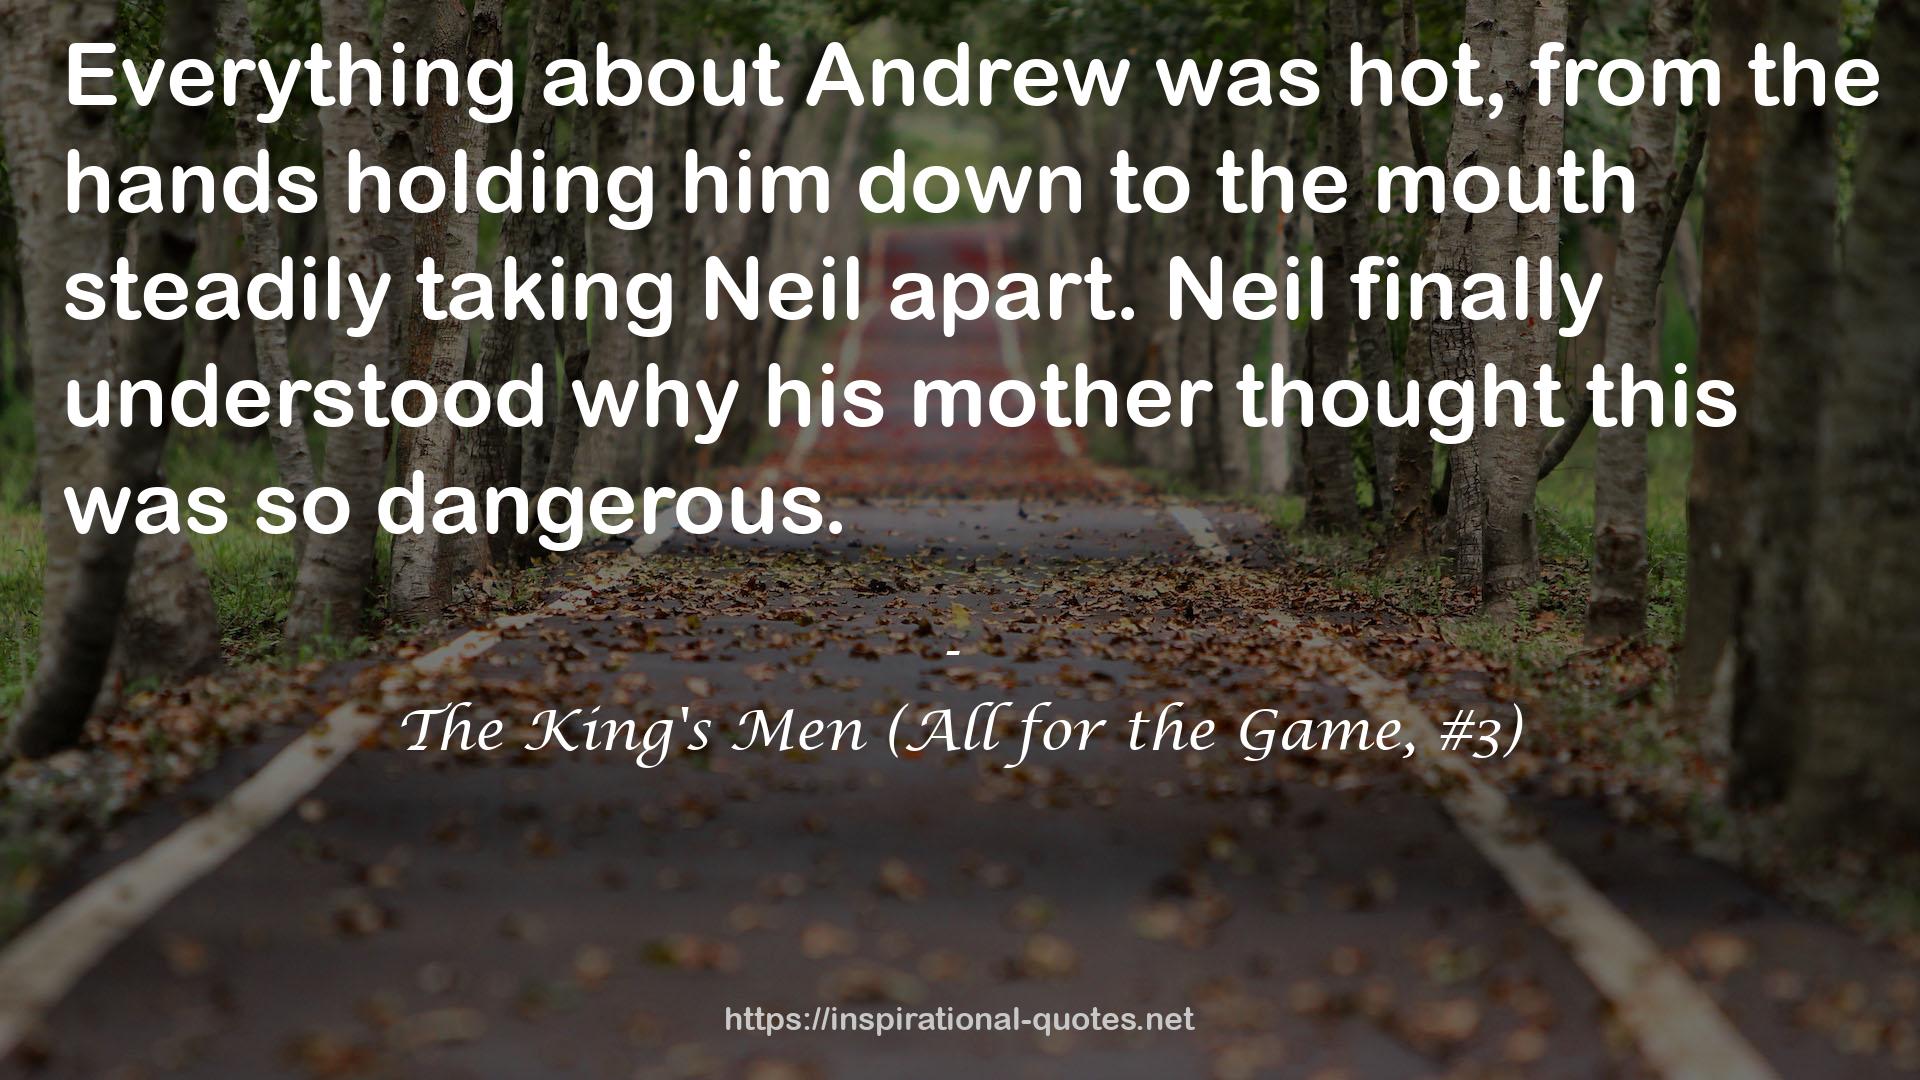 The King's Men (All for the Game, #3) QUOTES